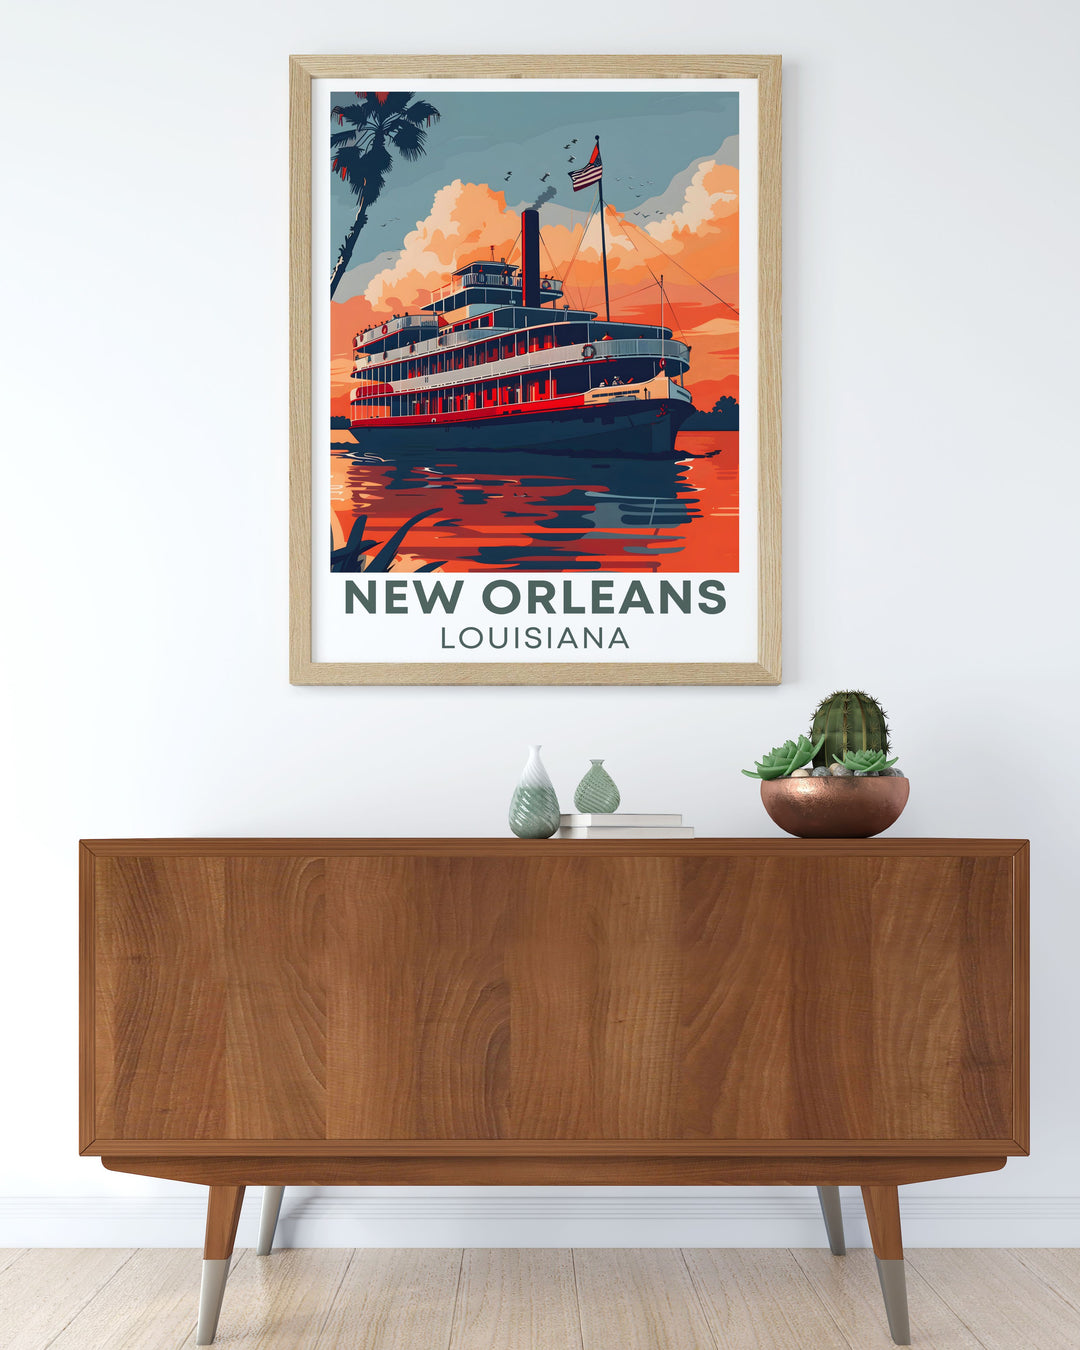 Stunning Steamboat Natchez wall art showcasing the steamboat on the Mississippi River ideal for enhancing your living space with a piece of New Orleans history and perfect for those who appreciate Louisiana travel prints